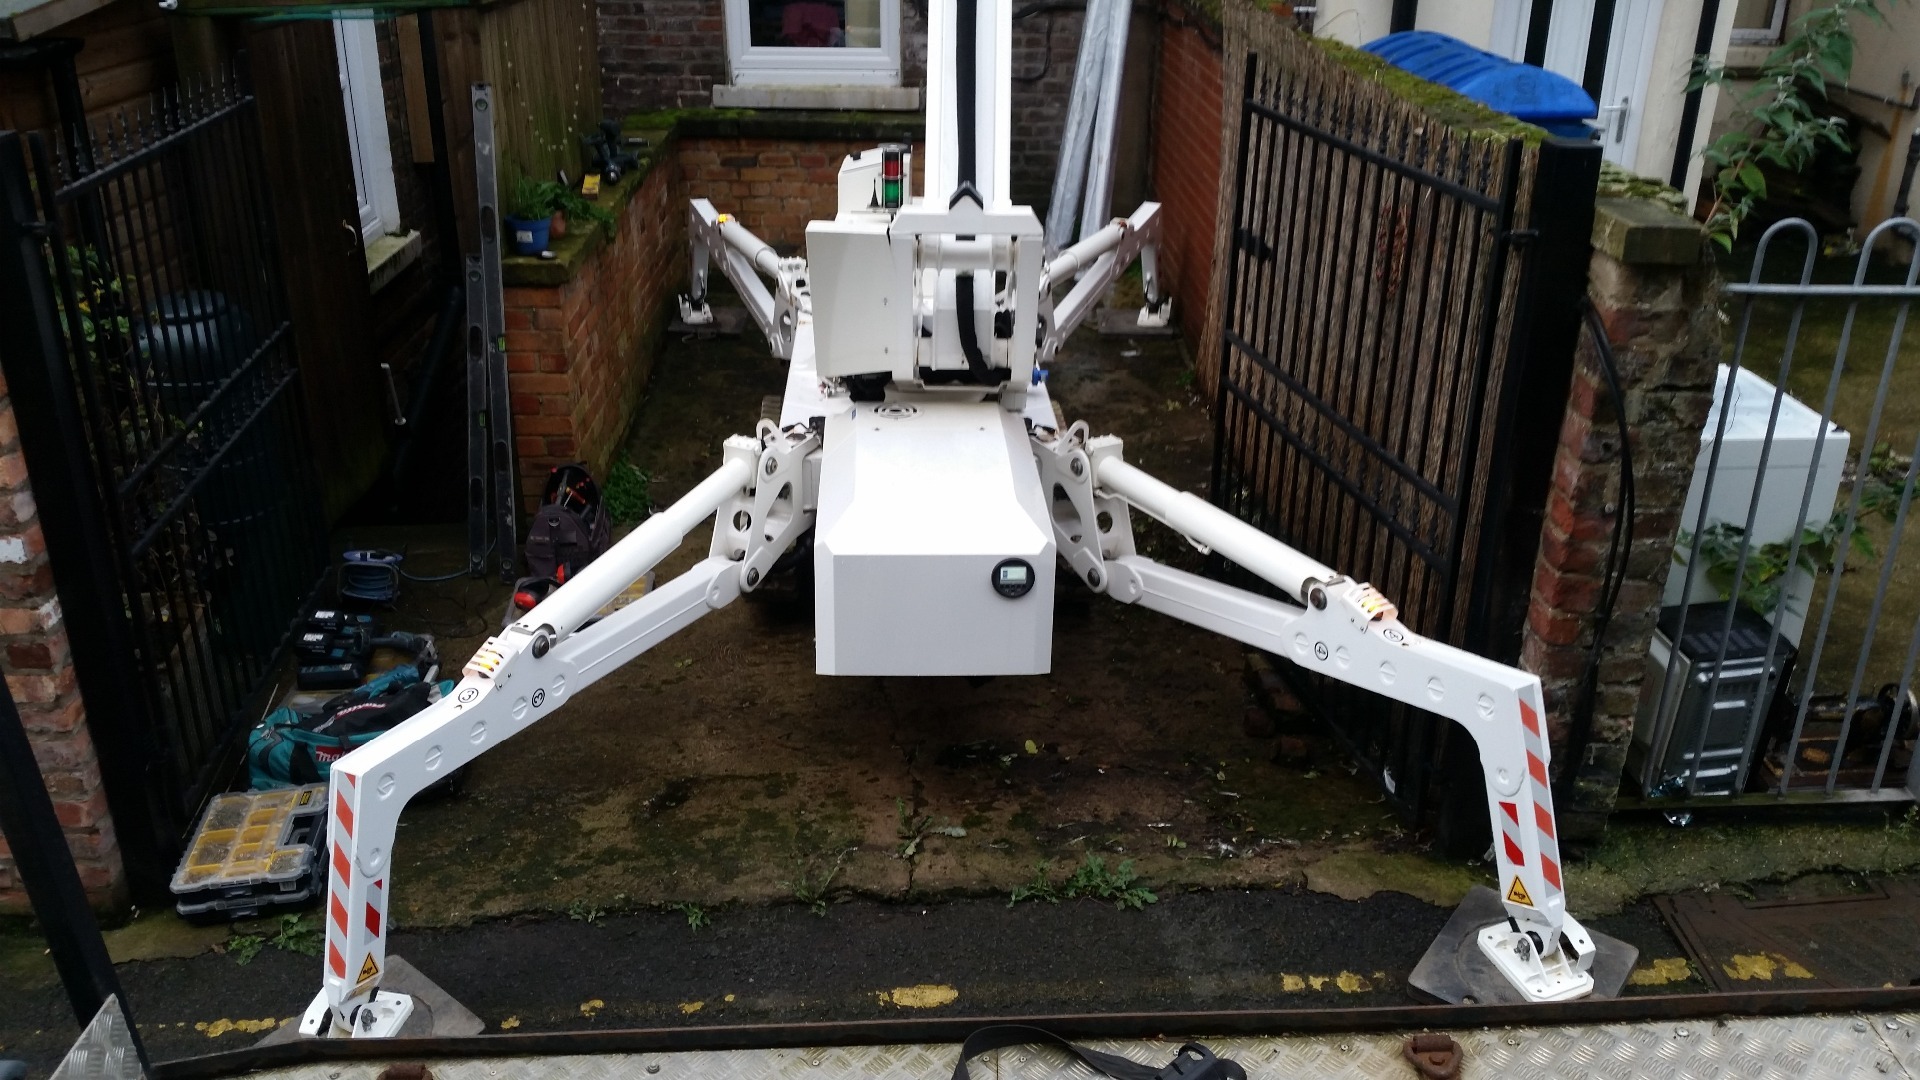 Tracked spider cherrypicker on narrow restricted hard-standing assisting contractors.